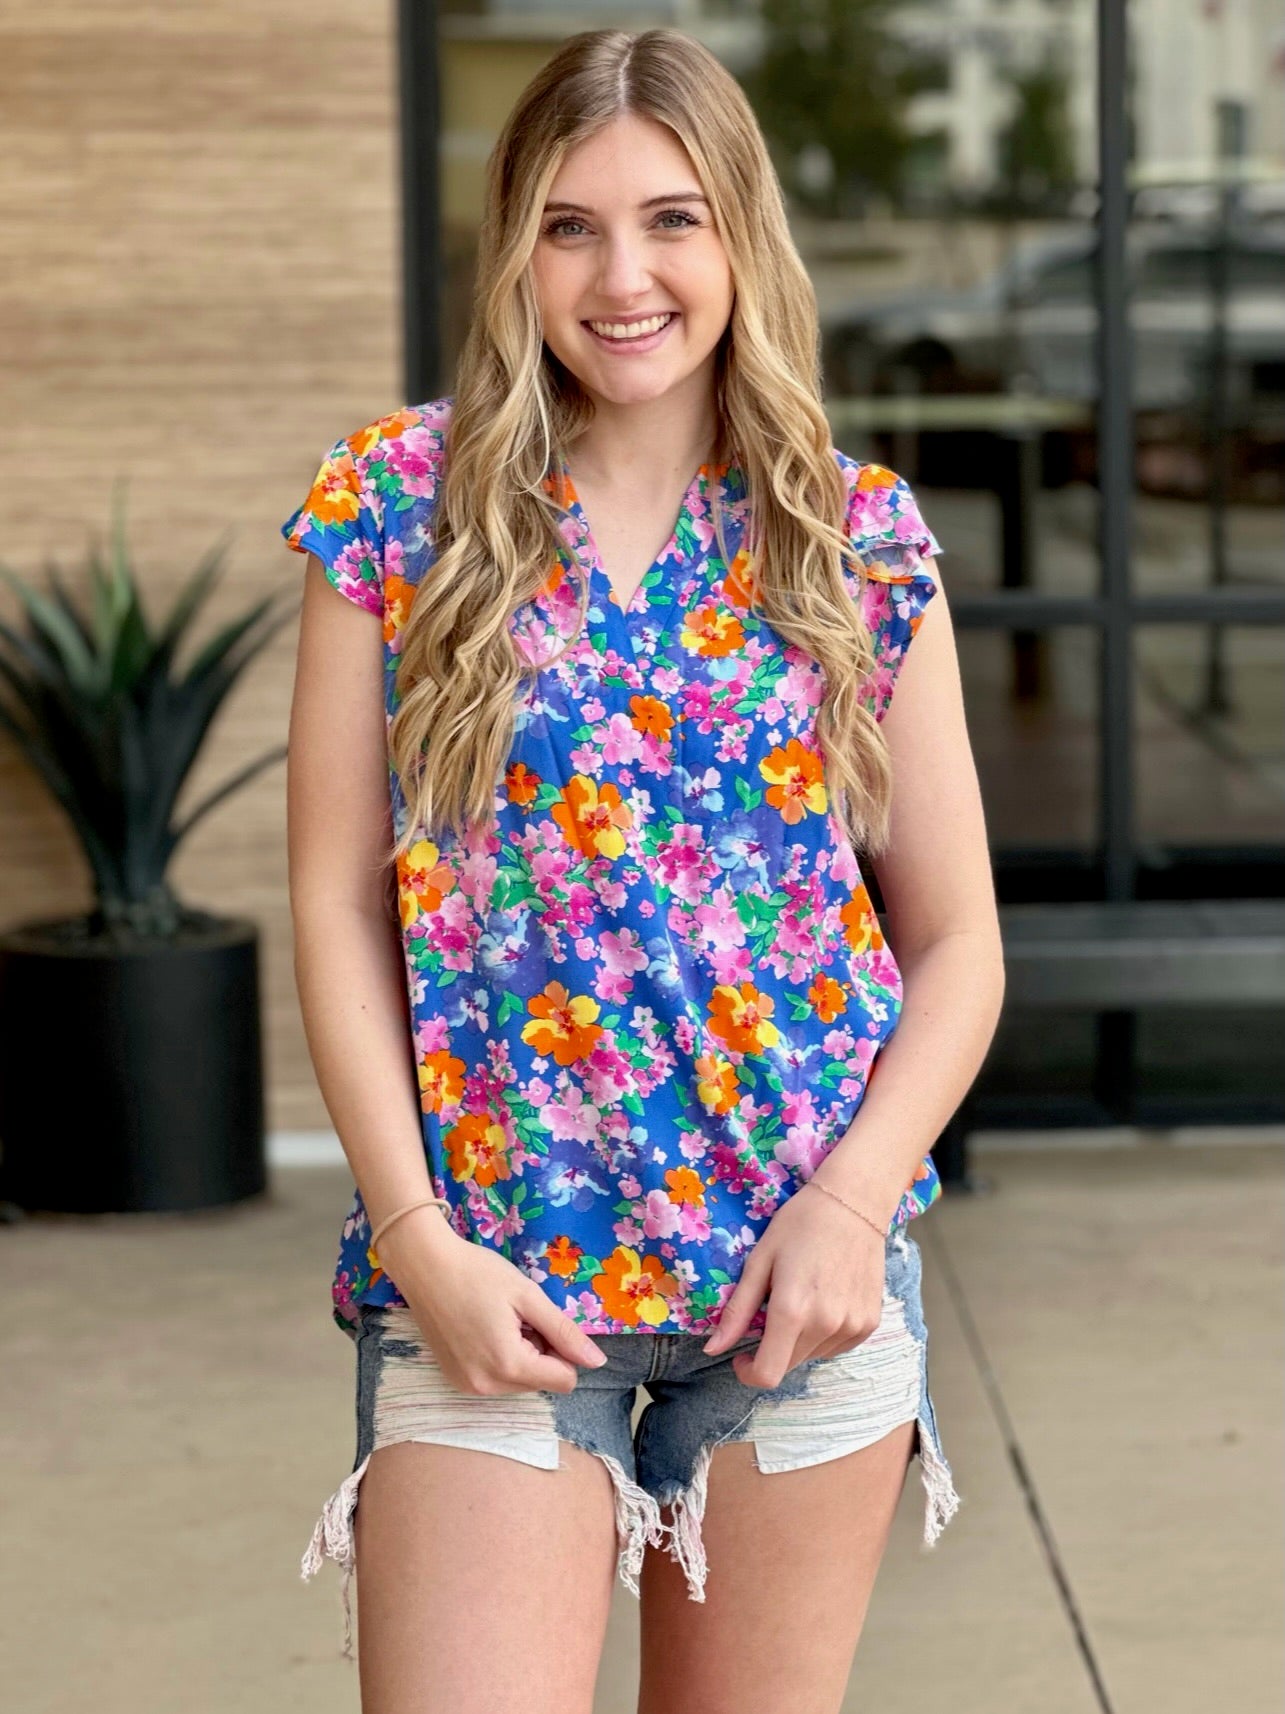 Lexi in royal multi blouse holding top 